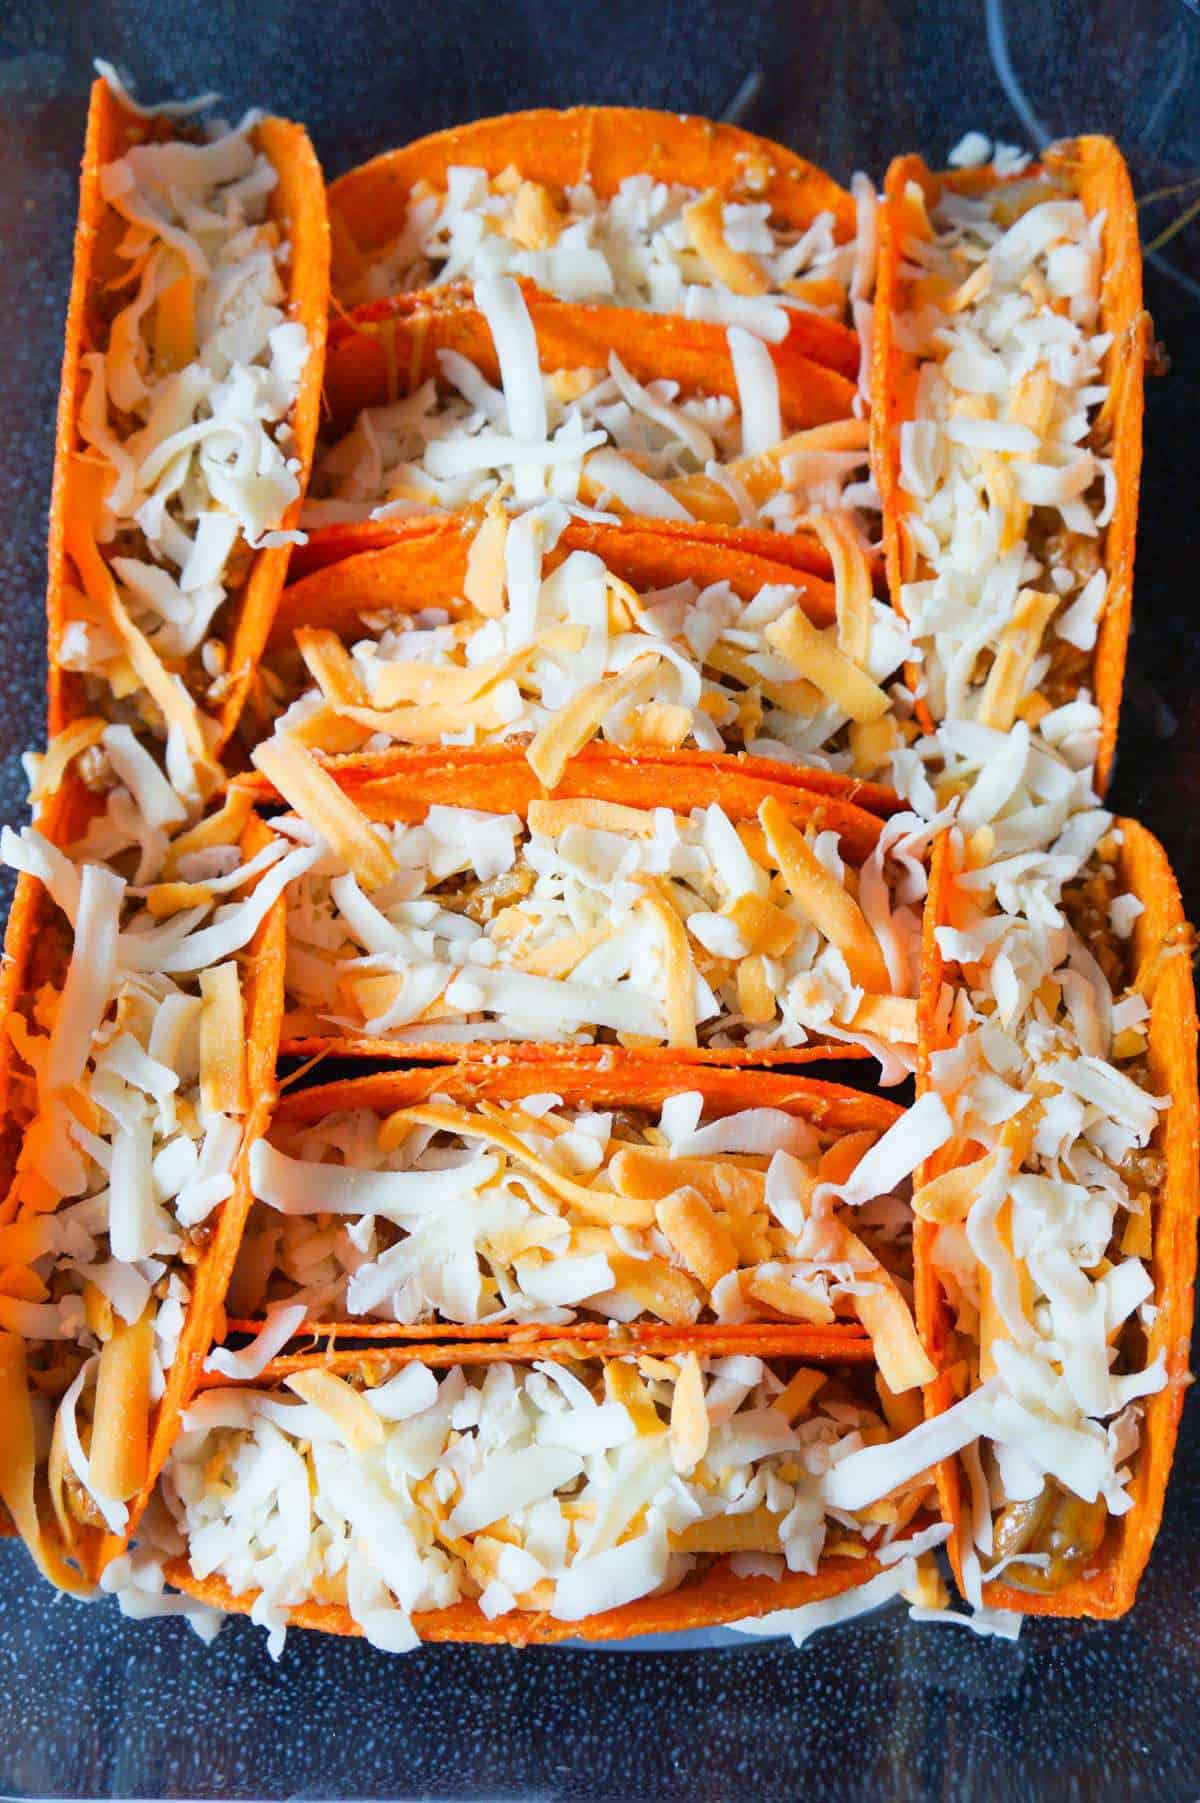 shredded cheese on top of beef tacos before baking